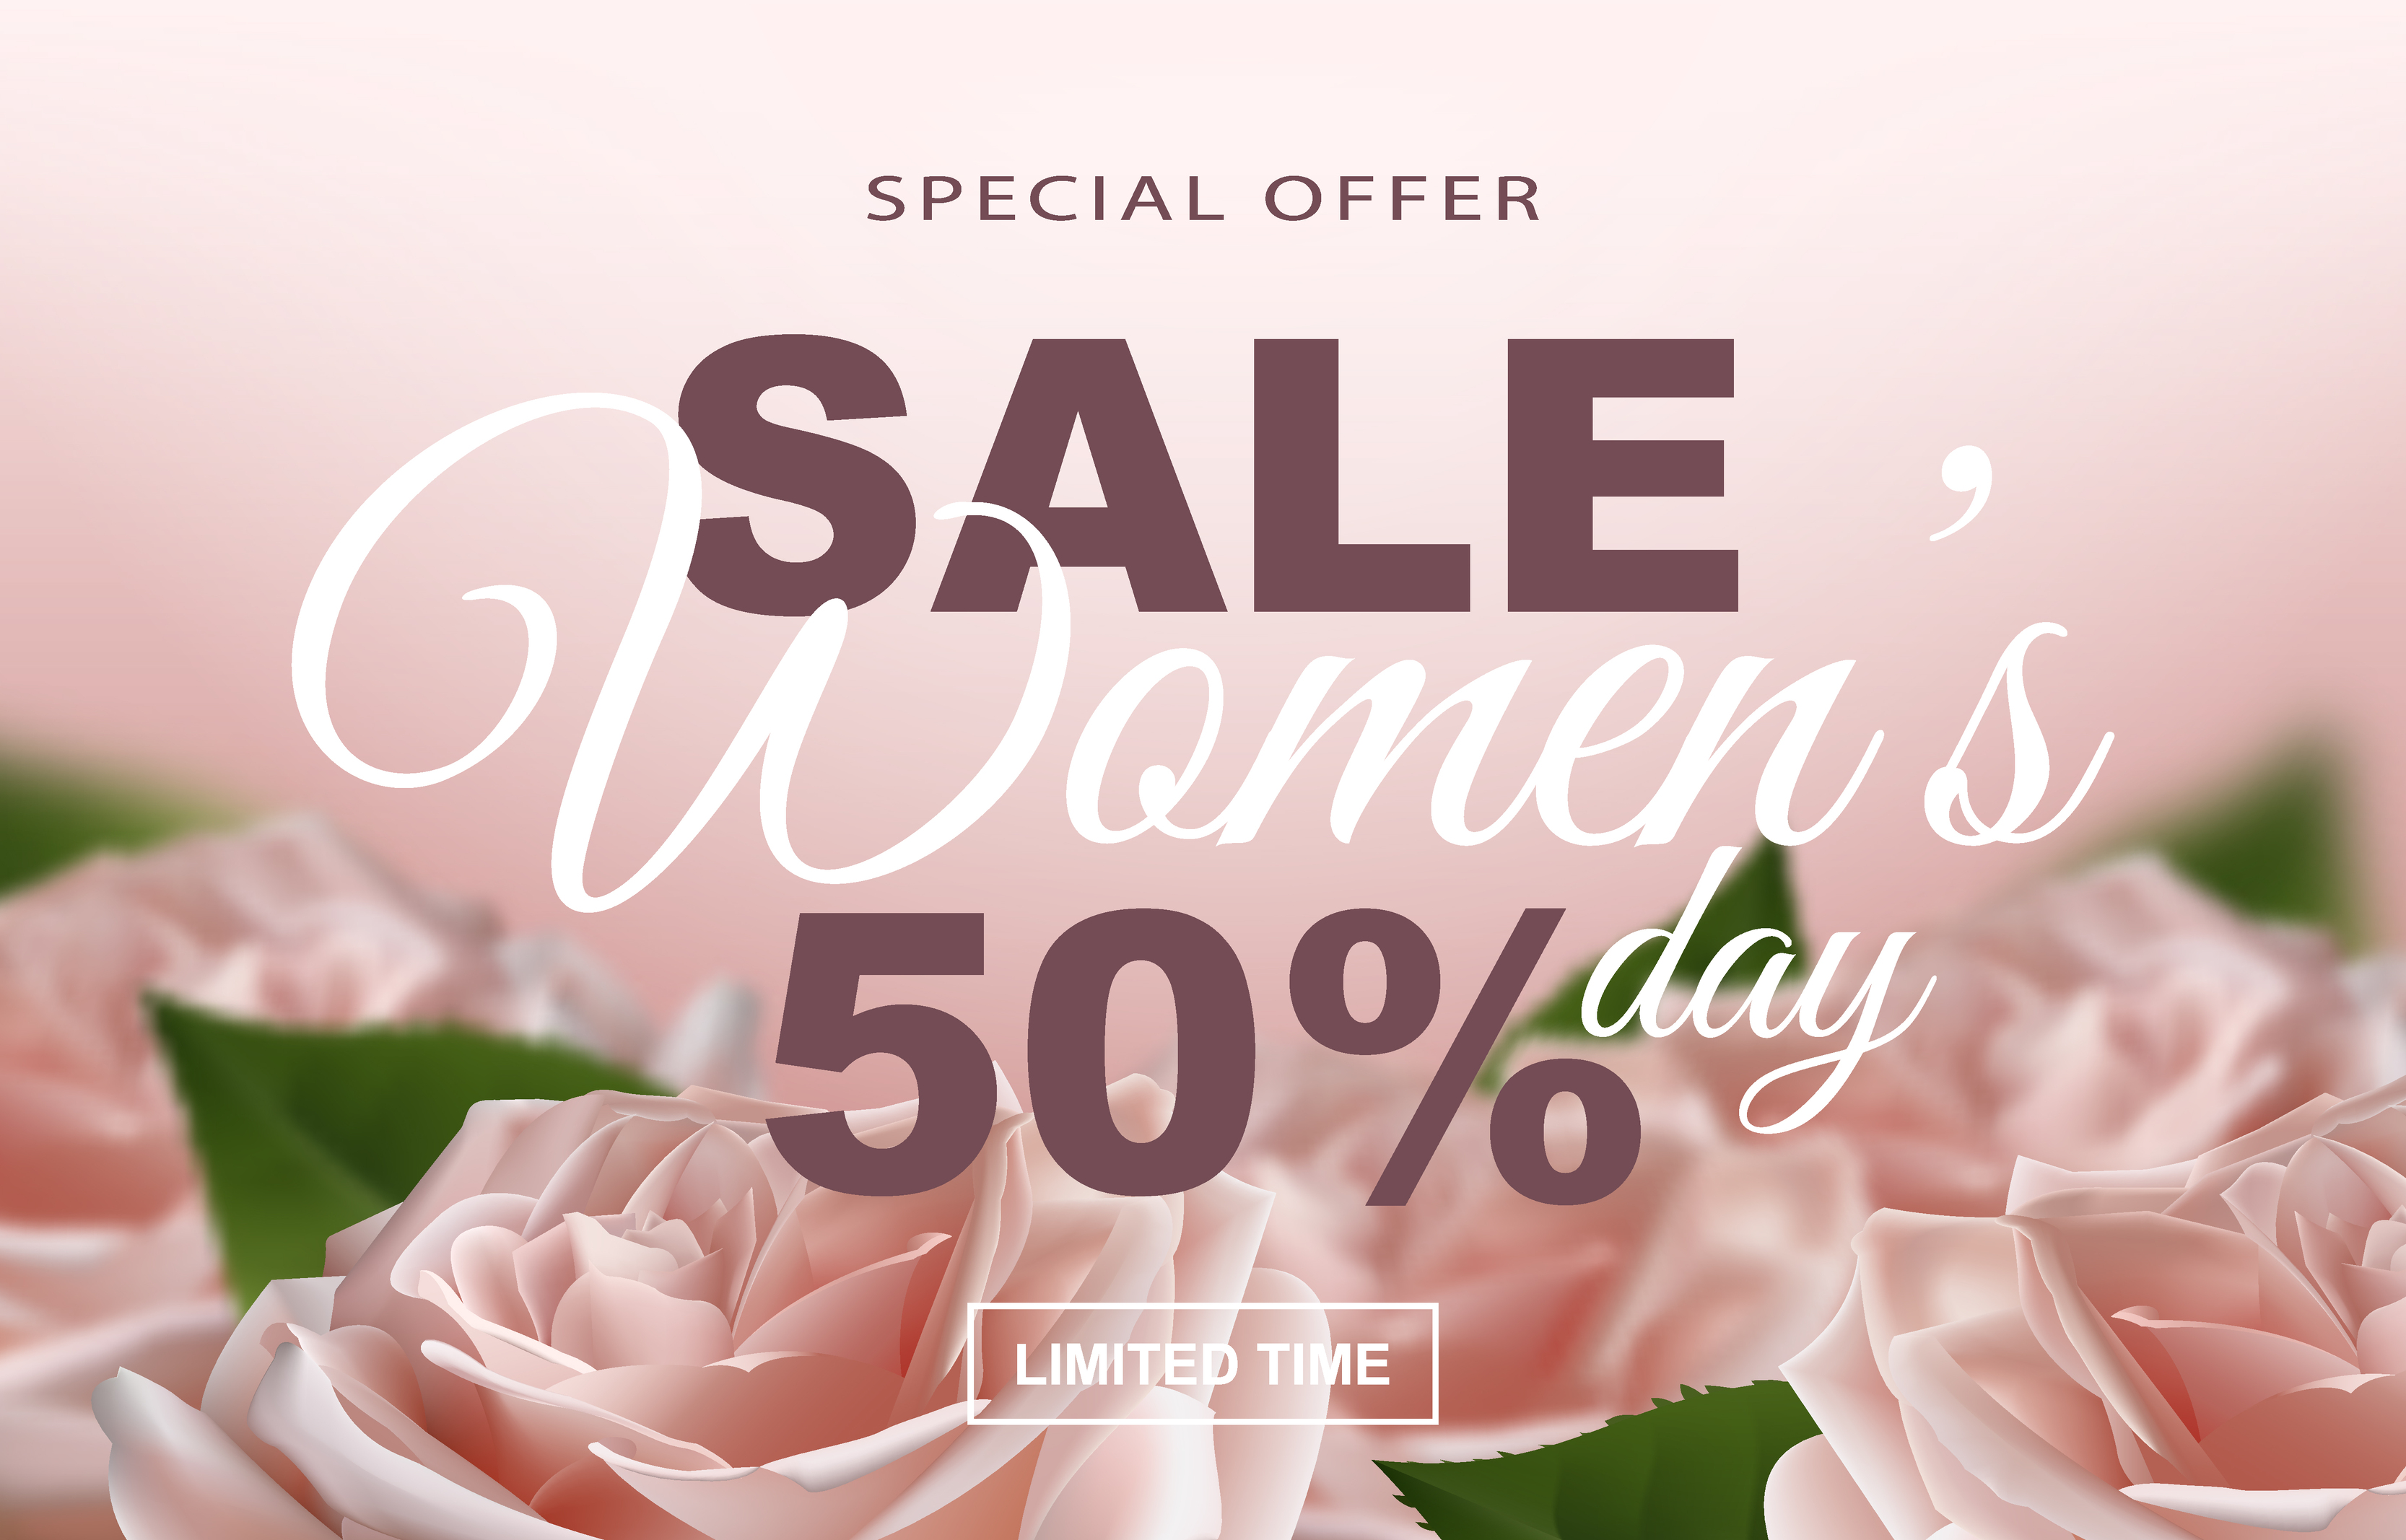 https://static.vecteezy.com/system/resources/previews/006/123/968/original/special-offer-women-s-day-sale-banner-with-realistic-rose-flowers-and-advertising-discount-text-decoration-illustration-vector.jpg